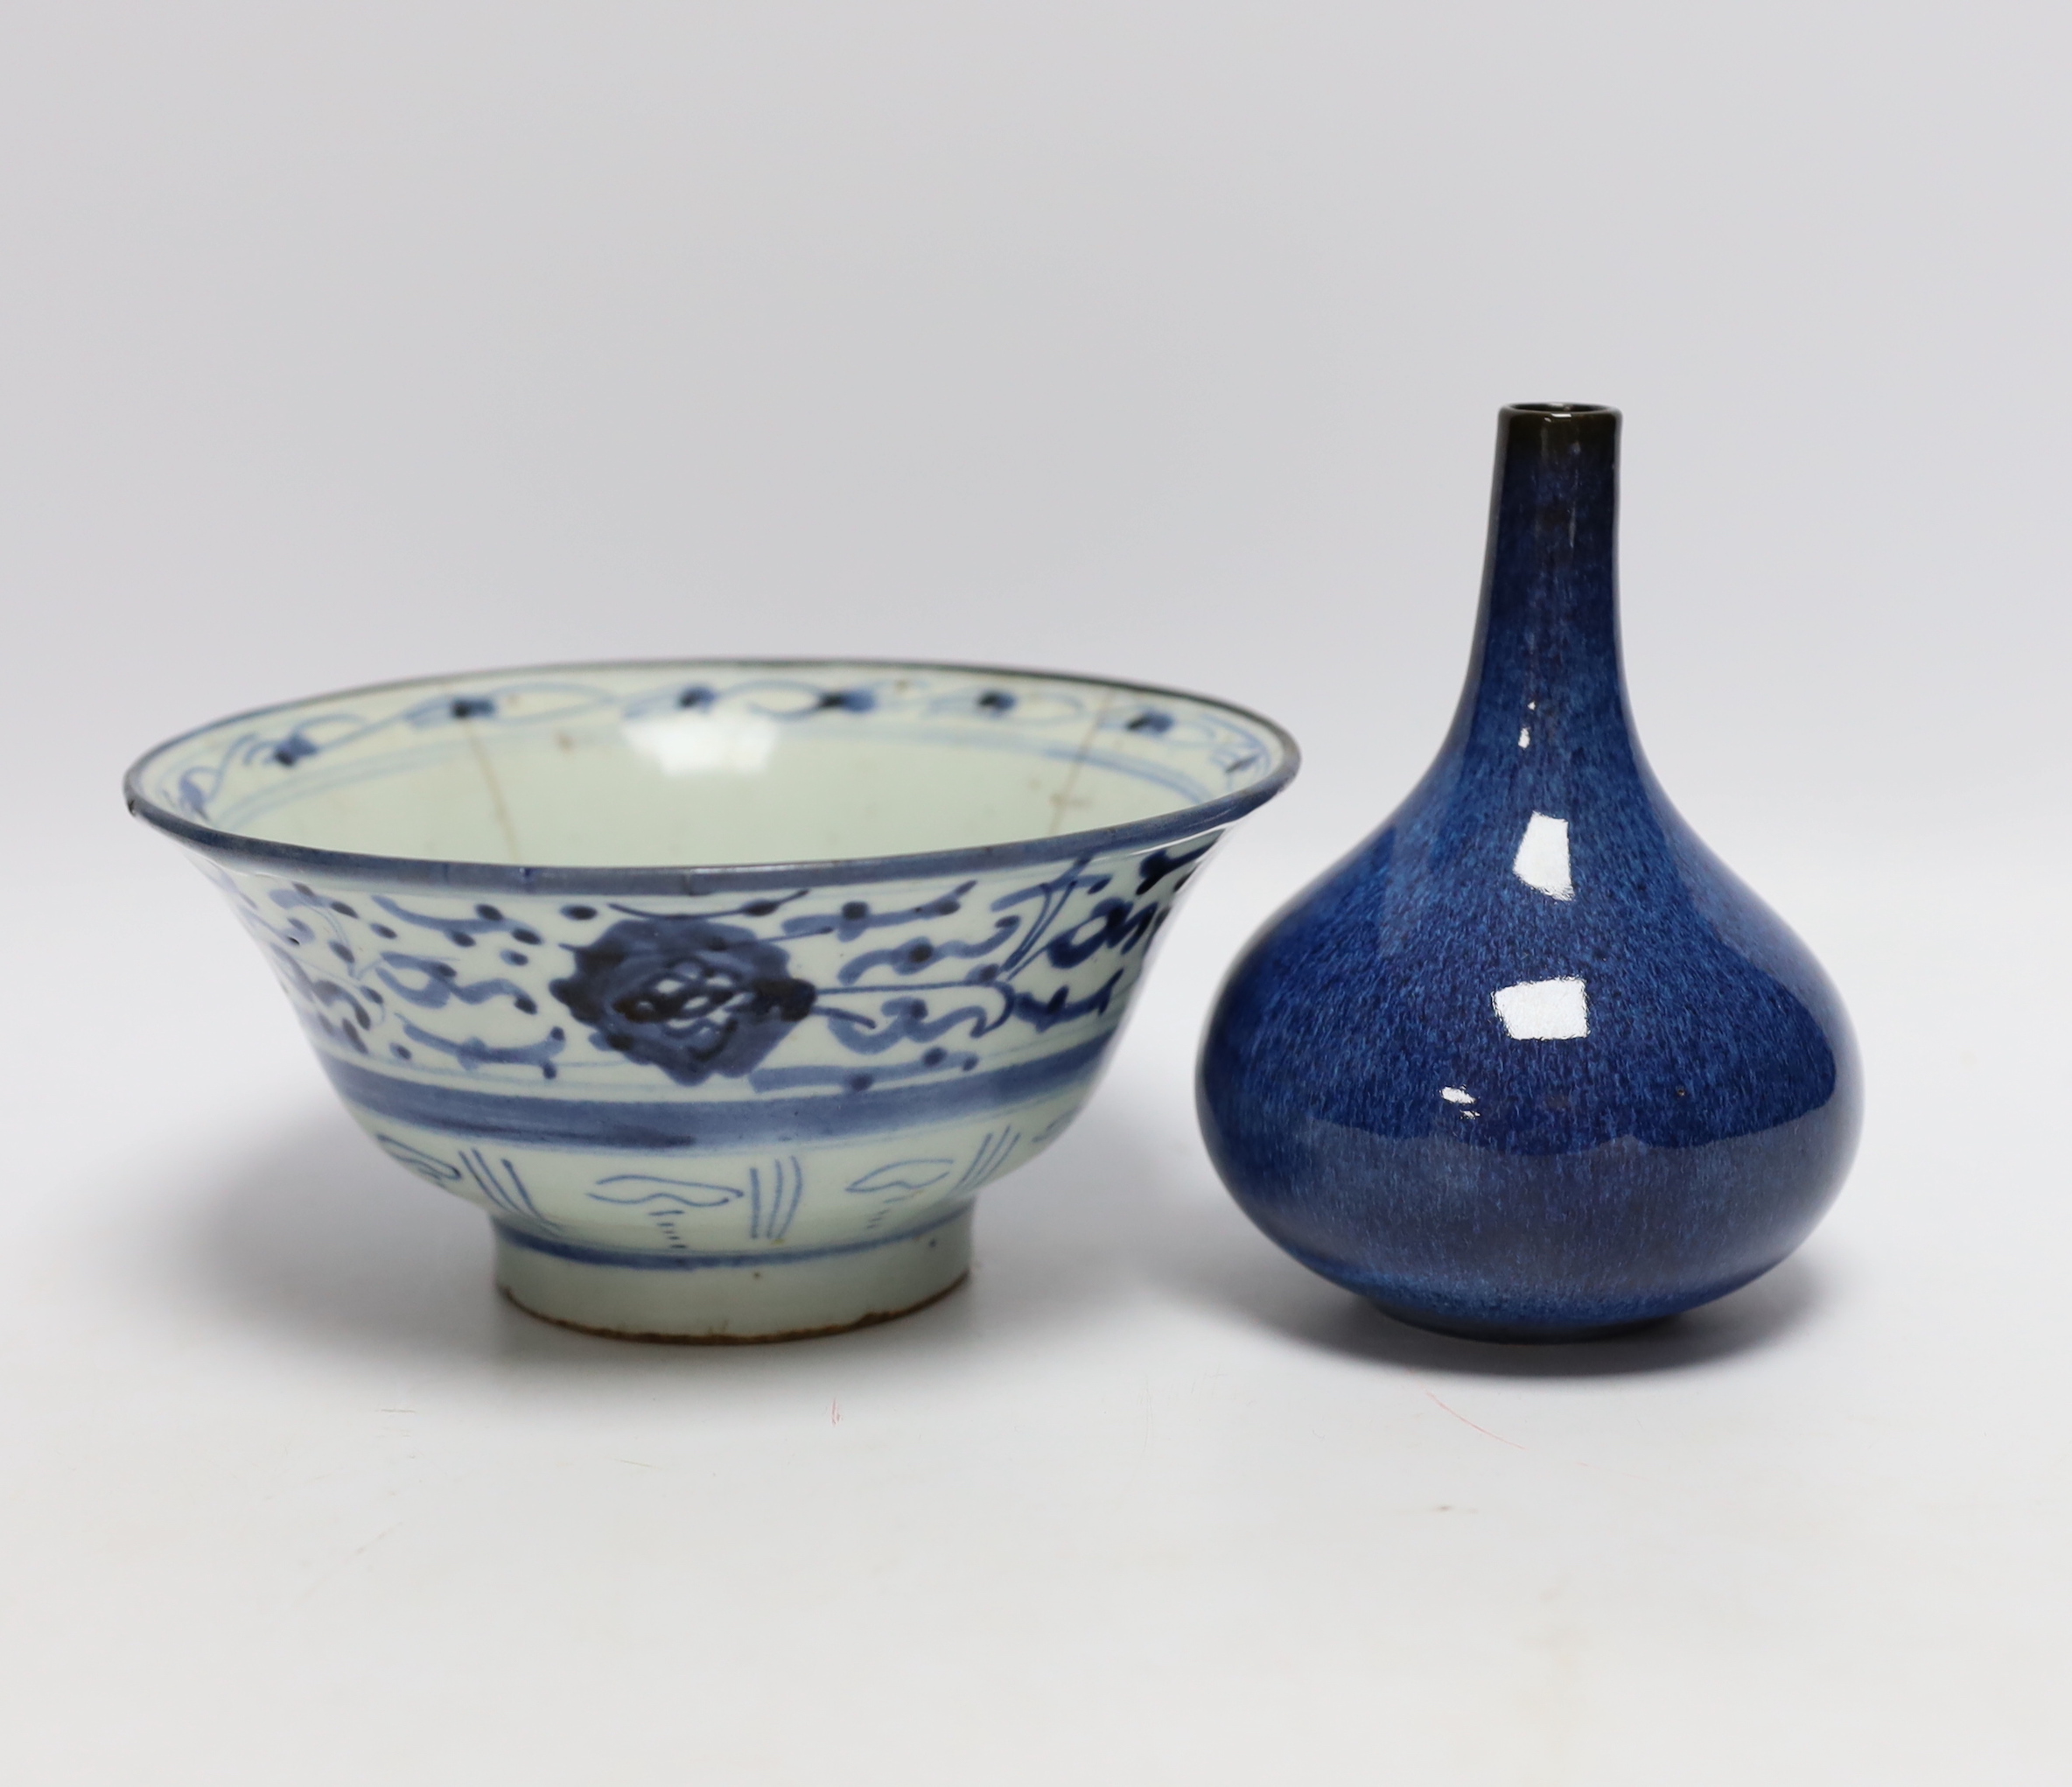 A Chinese blue and white bowl and a vase, largest 17cm in diameter